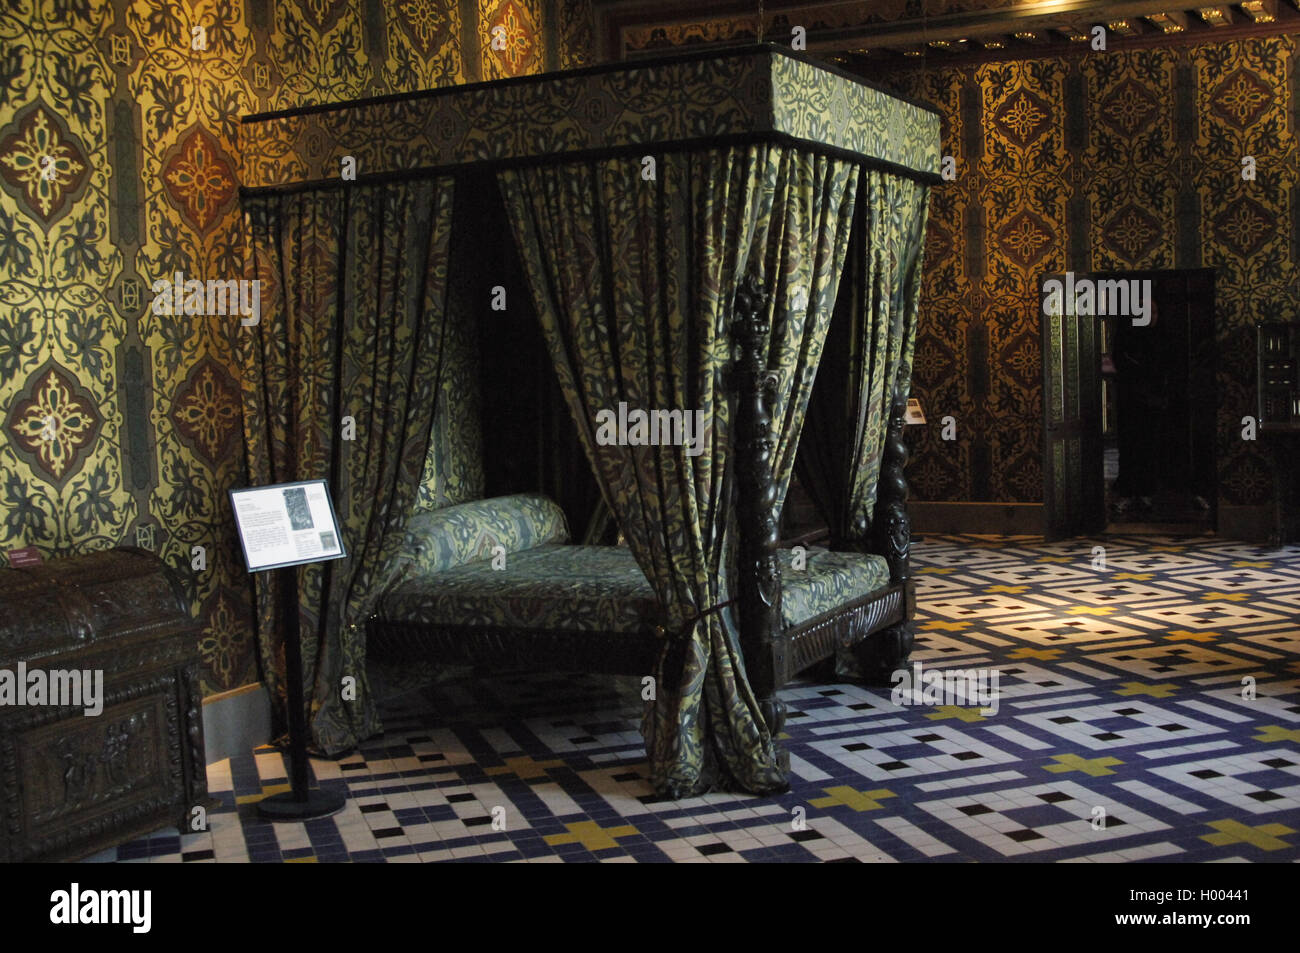 France. Blois. Royal Chateau. Bedroom of Catherine de Medici (1519-1589), Queen consort of France.16th century. Stock Photo